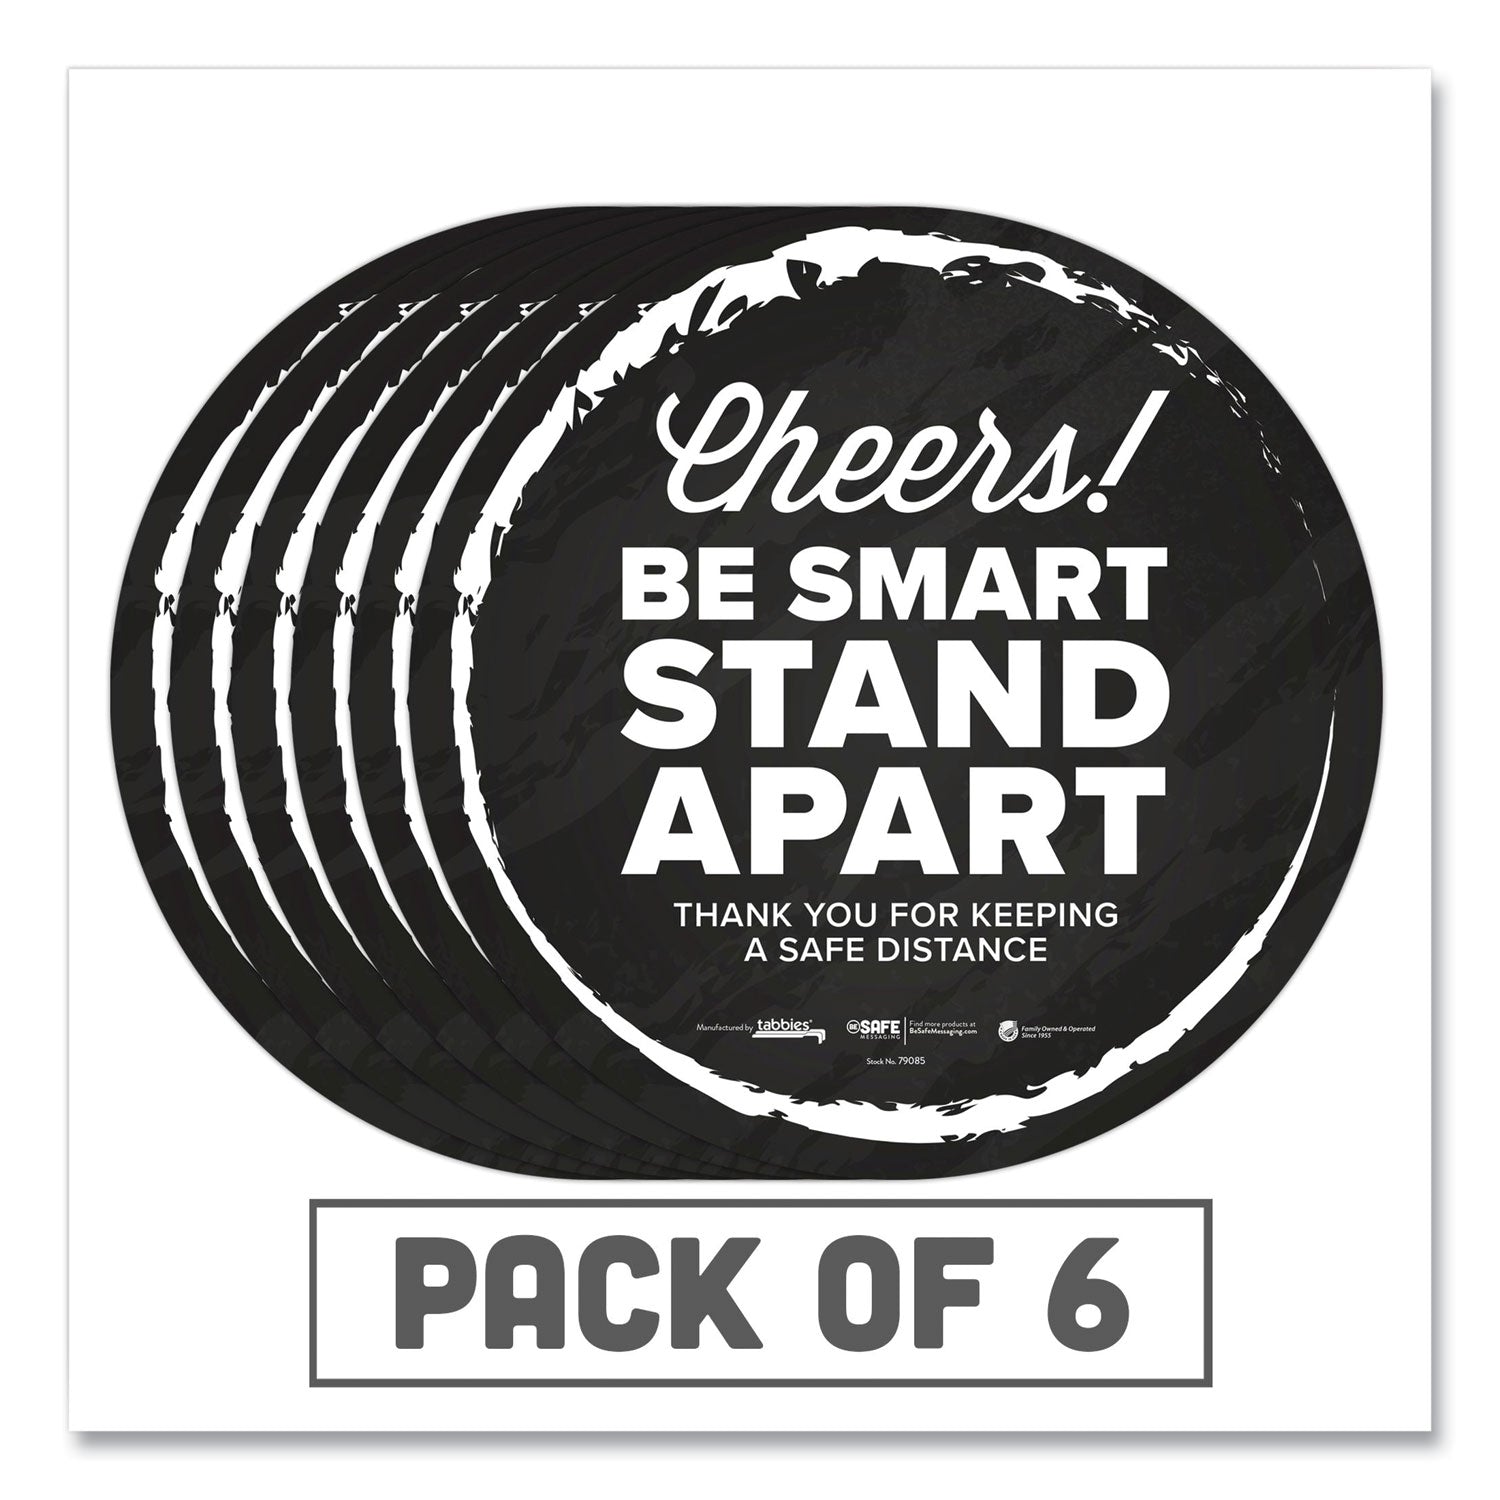 besafe-messaging-floor-decals-cheers;be-smart-stand-apart;thank-you-for-keeping-a-safe-distance-12-dia-black-white-6-ct_tab79085 - 1